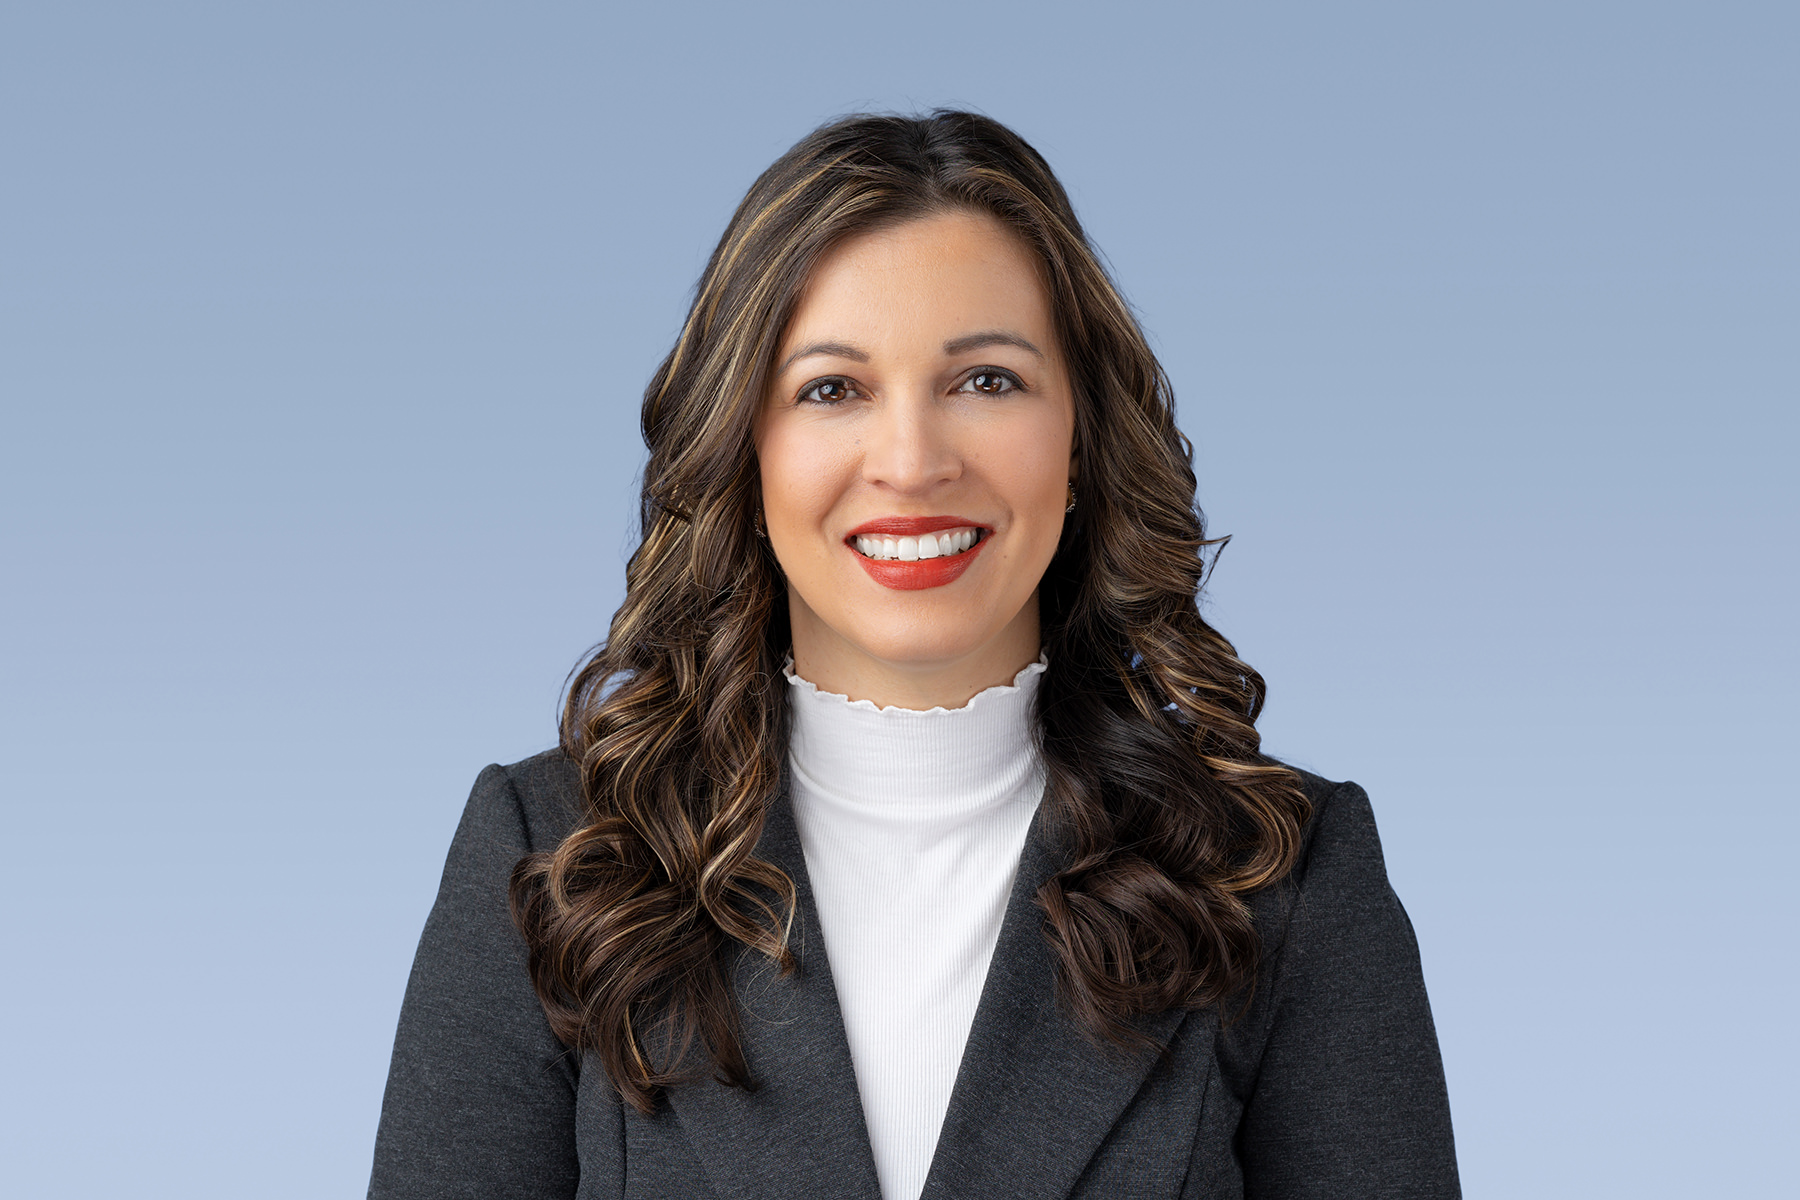 Professional woman with a friendly smile wearing a blazer and white top against a blue background for her Denver headshots.